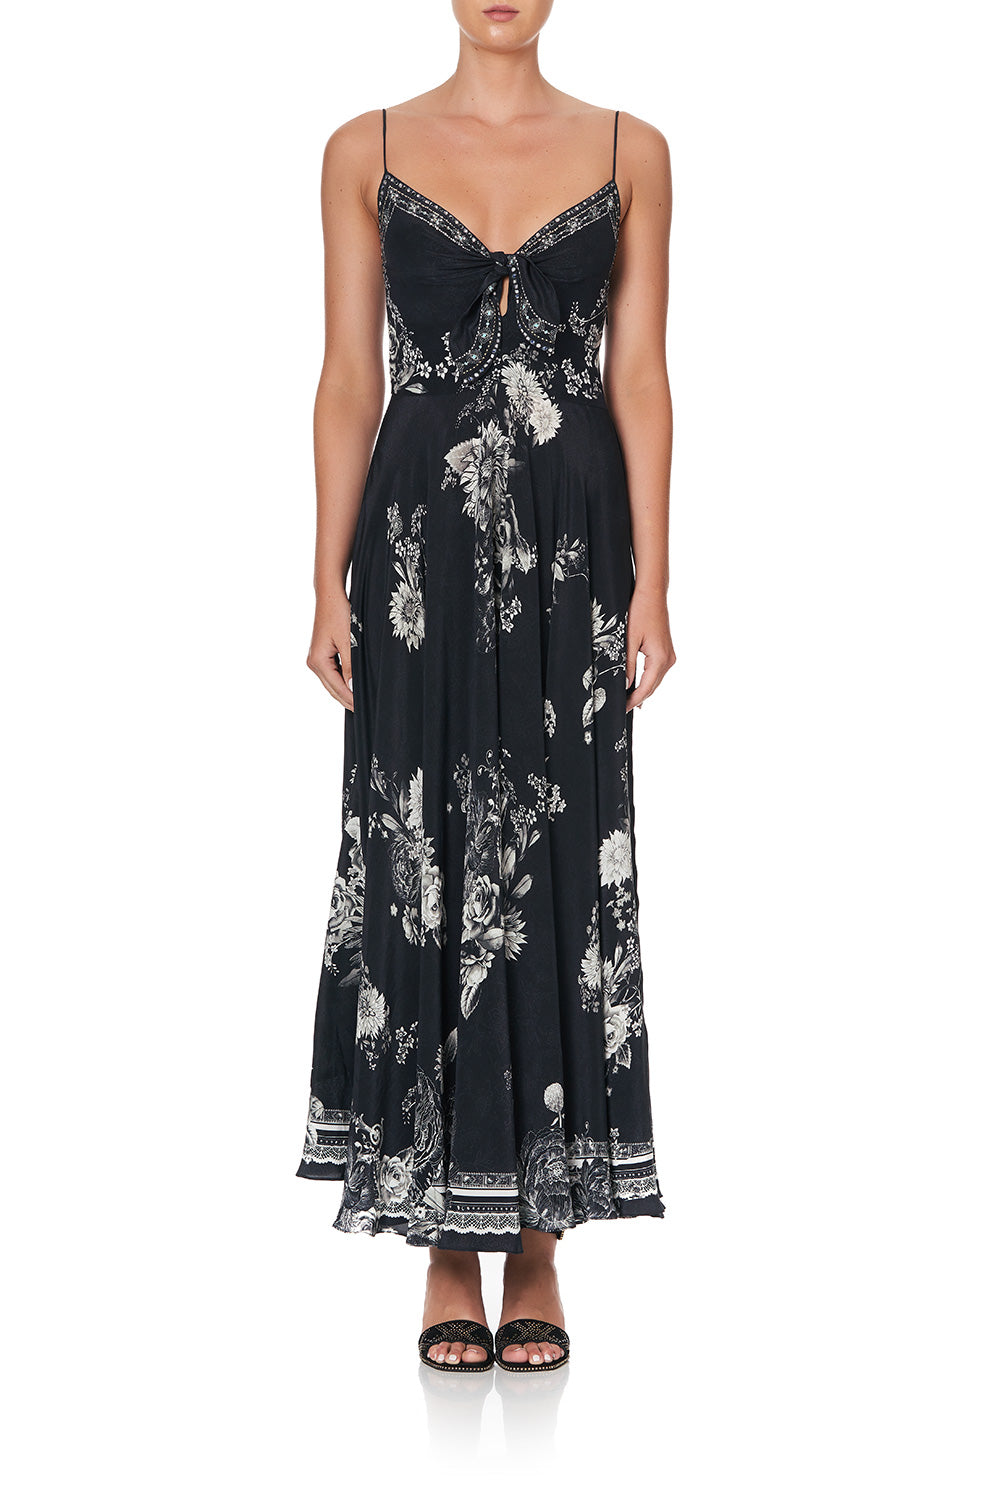 LONG DRESS WITH TIE FRONT MOONSHINE BLOOM